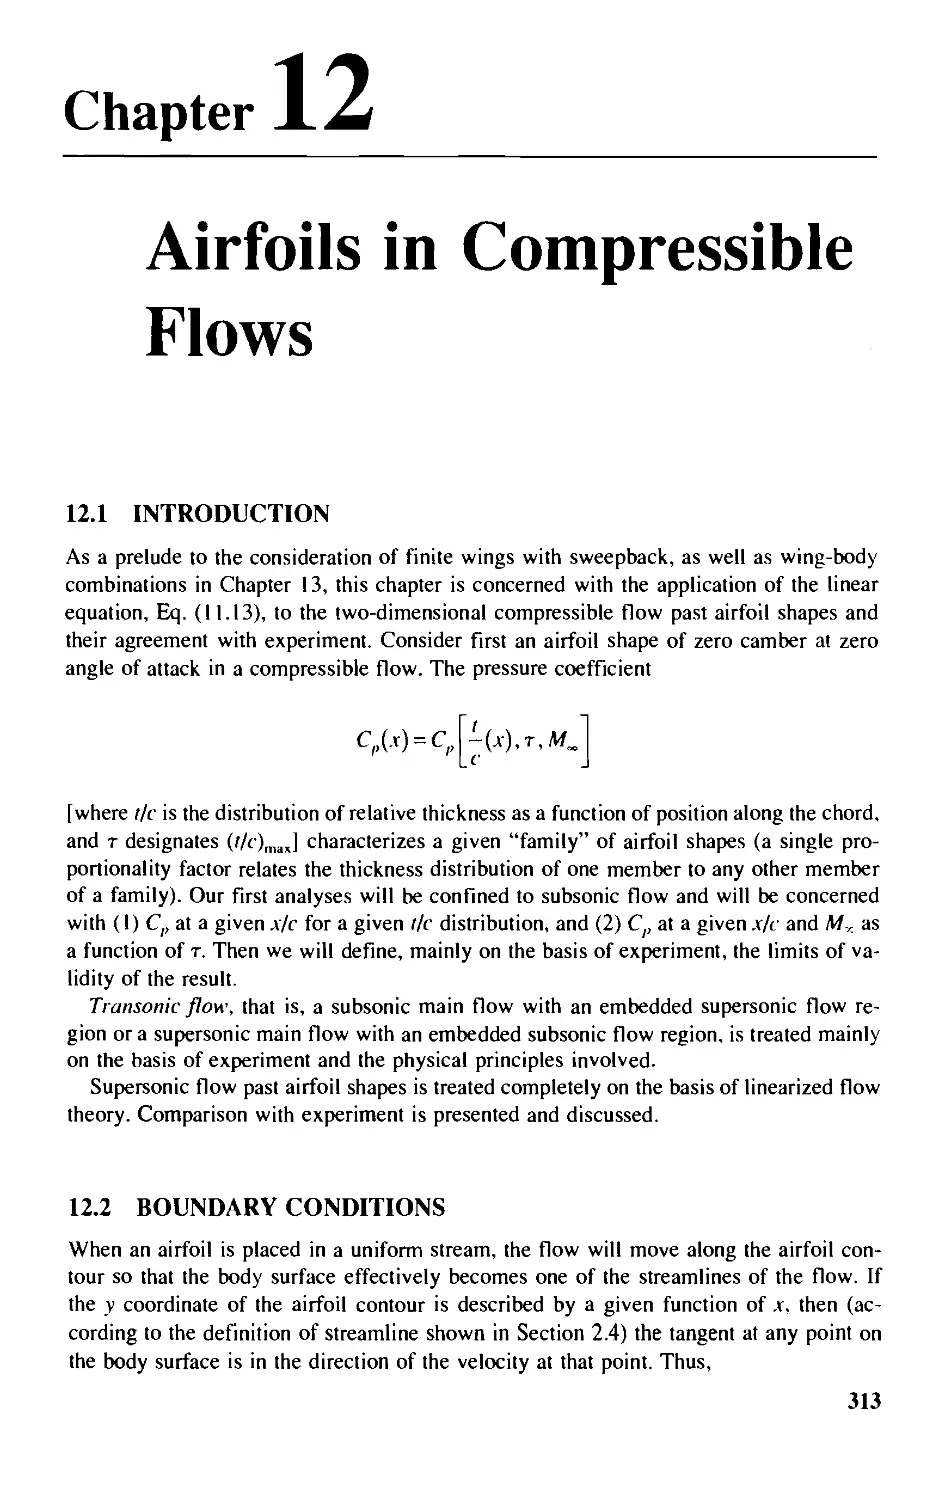 Chapter 12 - Airfoils in Compressible Flows
12.2 - Boundary Conditions